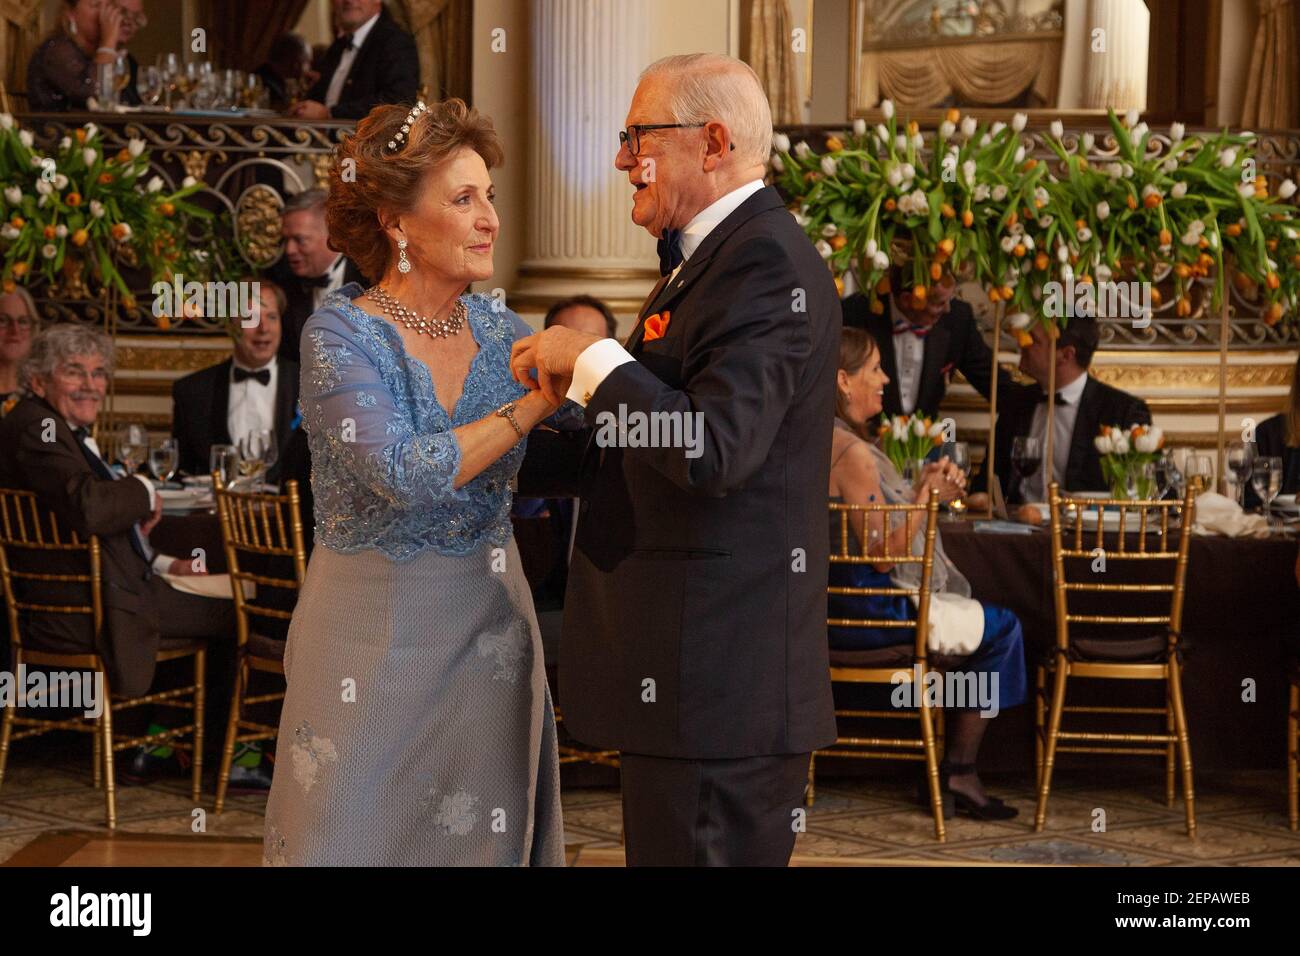 Princess Margriet and Pieter van Vollenhoven during the 38th edition of the  Peter Stuyvesant Ball at the Plaza hotel in New York, NY on November 22,  2019. The Peter Stuyvesant ball is